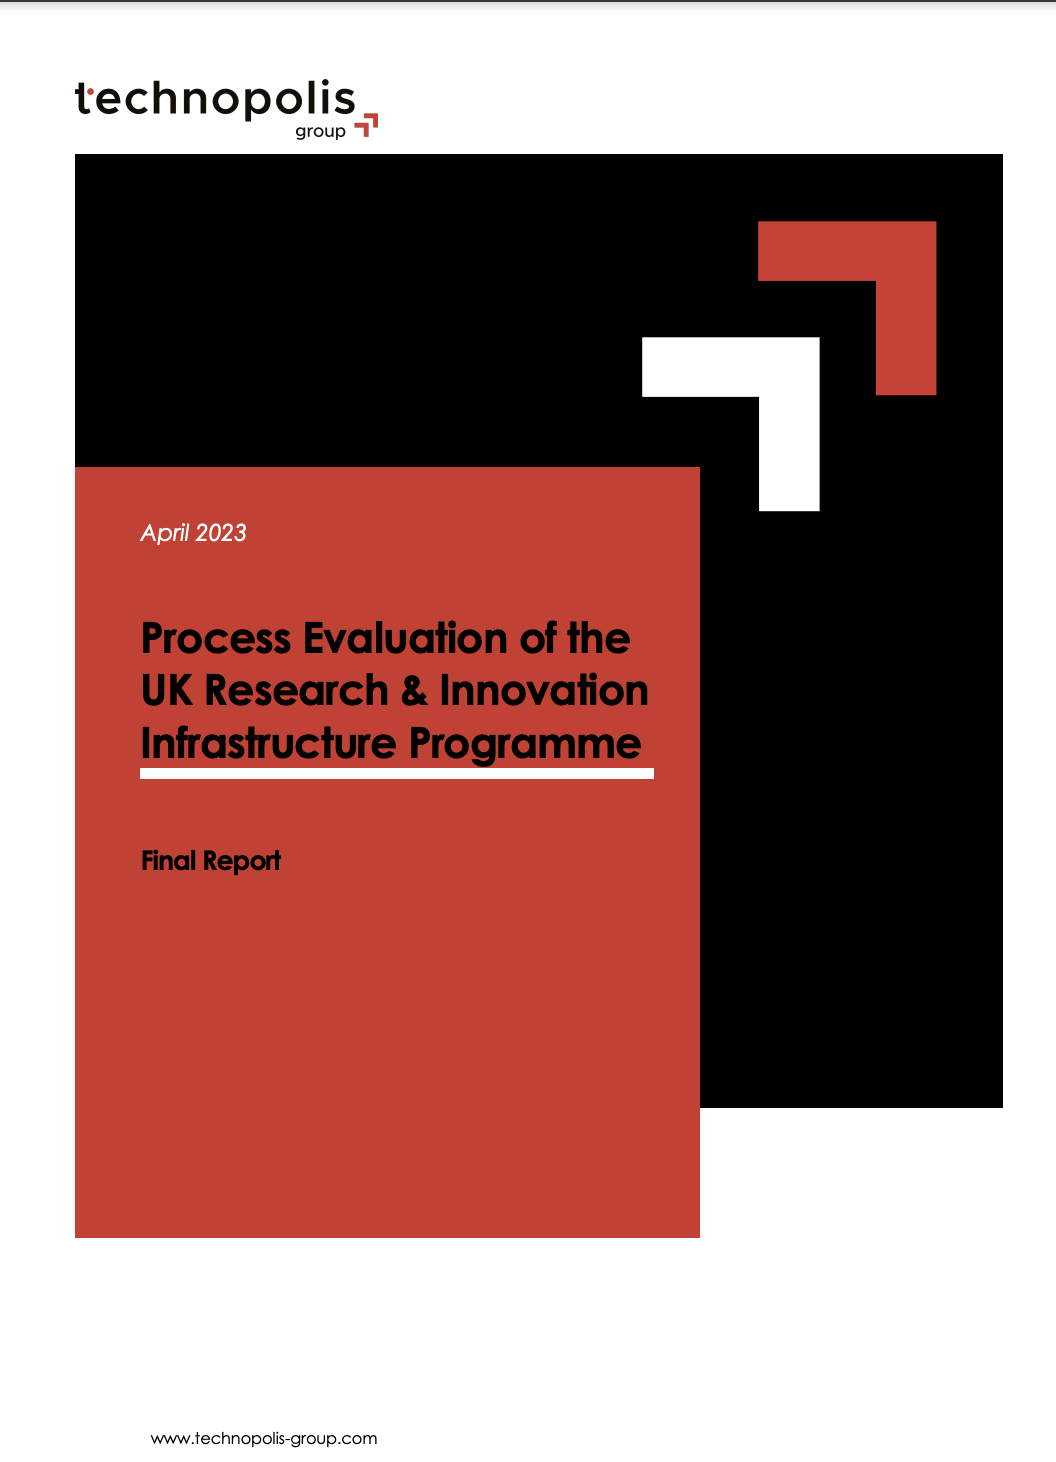 Process evaluation of the UKRI infrastructure programme